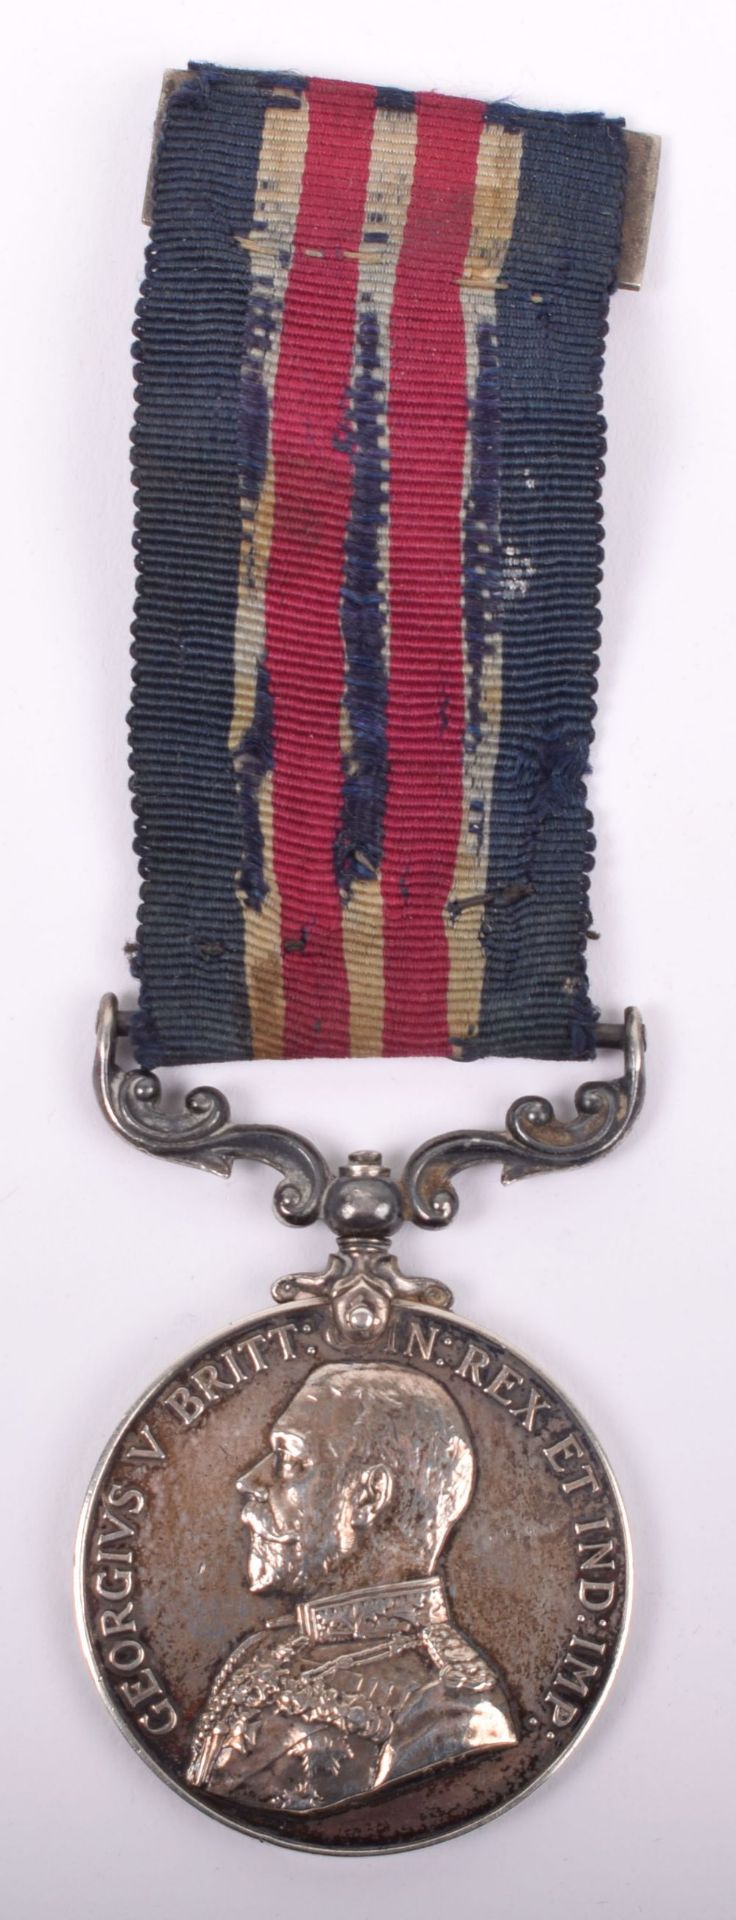 George V Military Medal (M.M) 219th Company Machine Gun Corps / East Surrey Regiment, Awarded for Ga